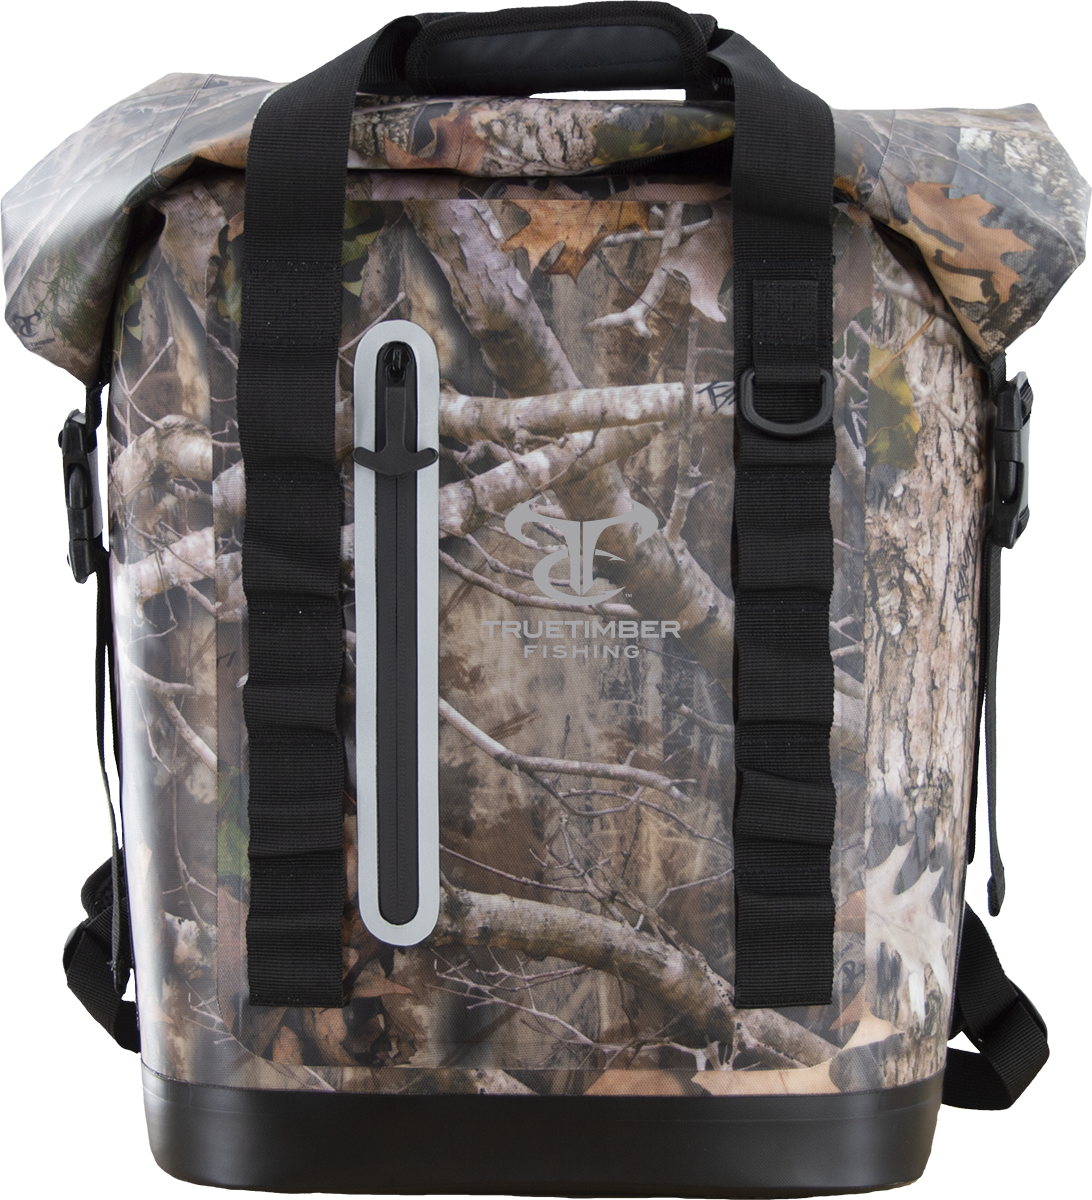 New Coolers and Waterproof Dry Bag Lineup from TrueTimber